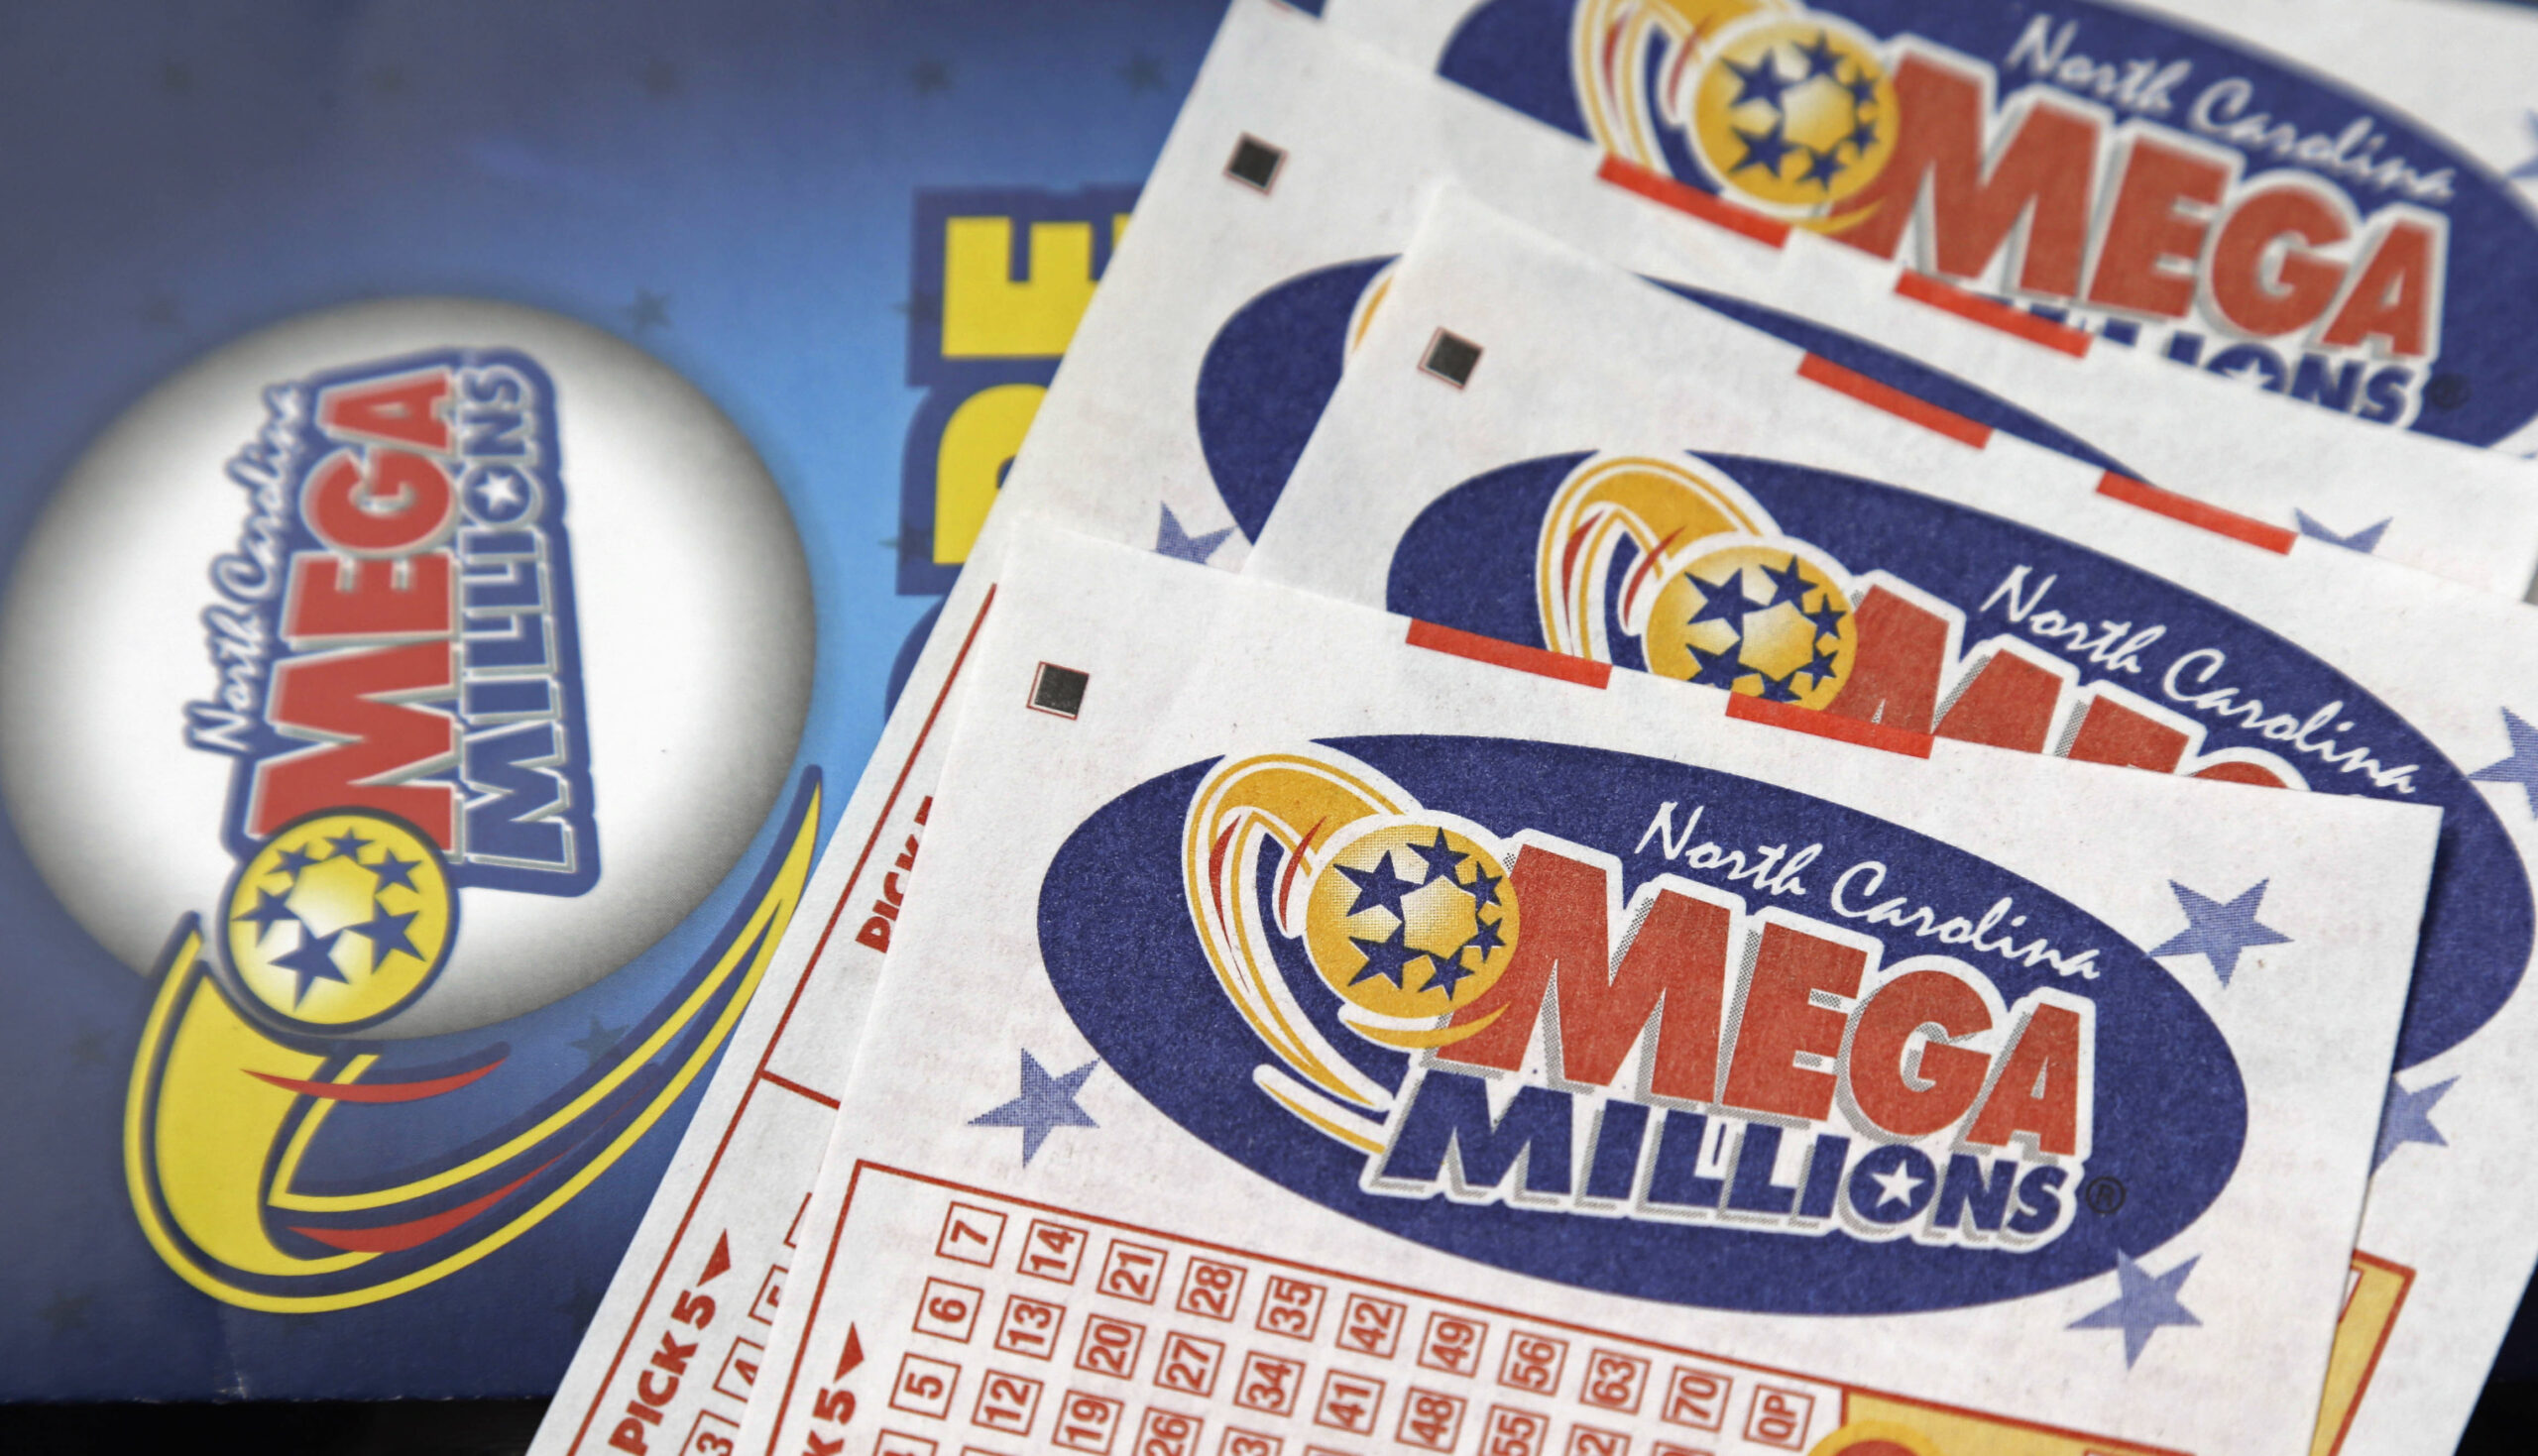 Top critical tips for a lottery win